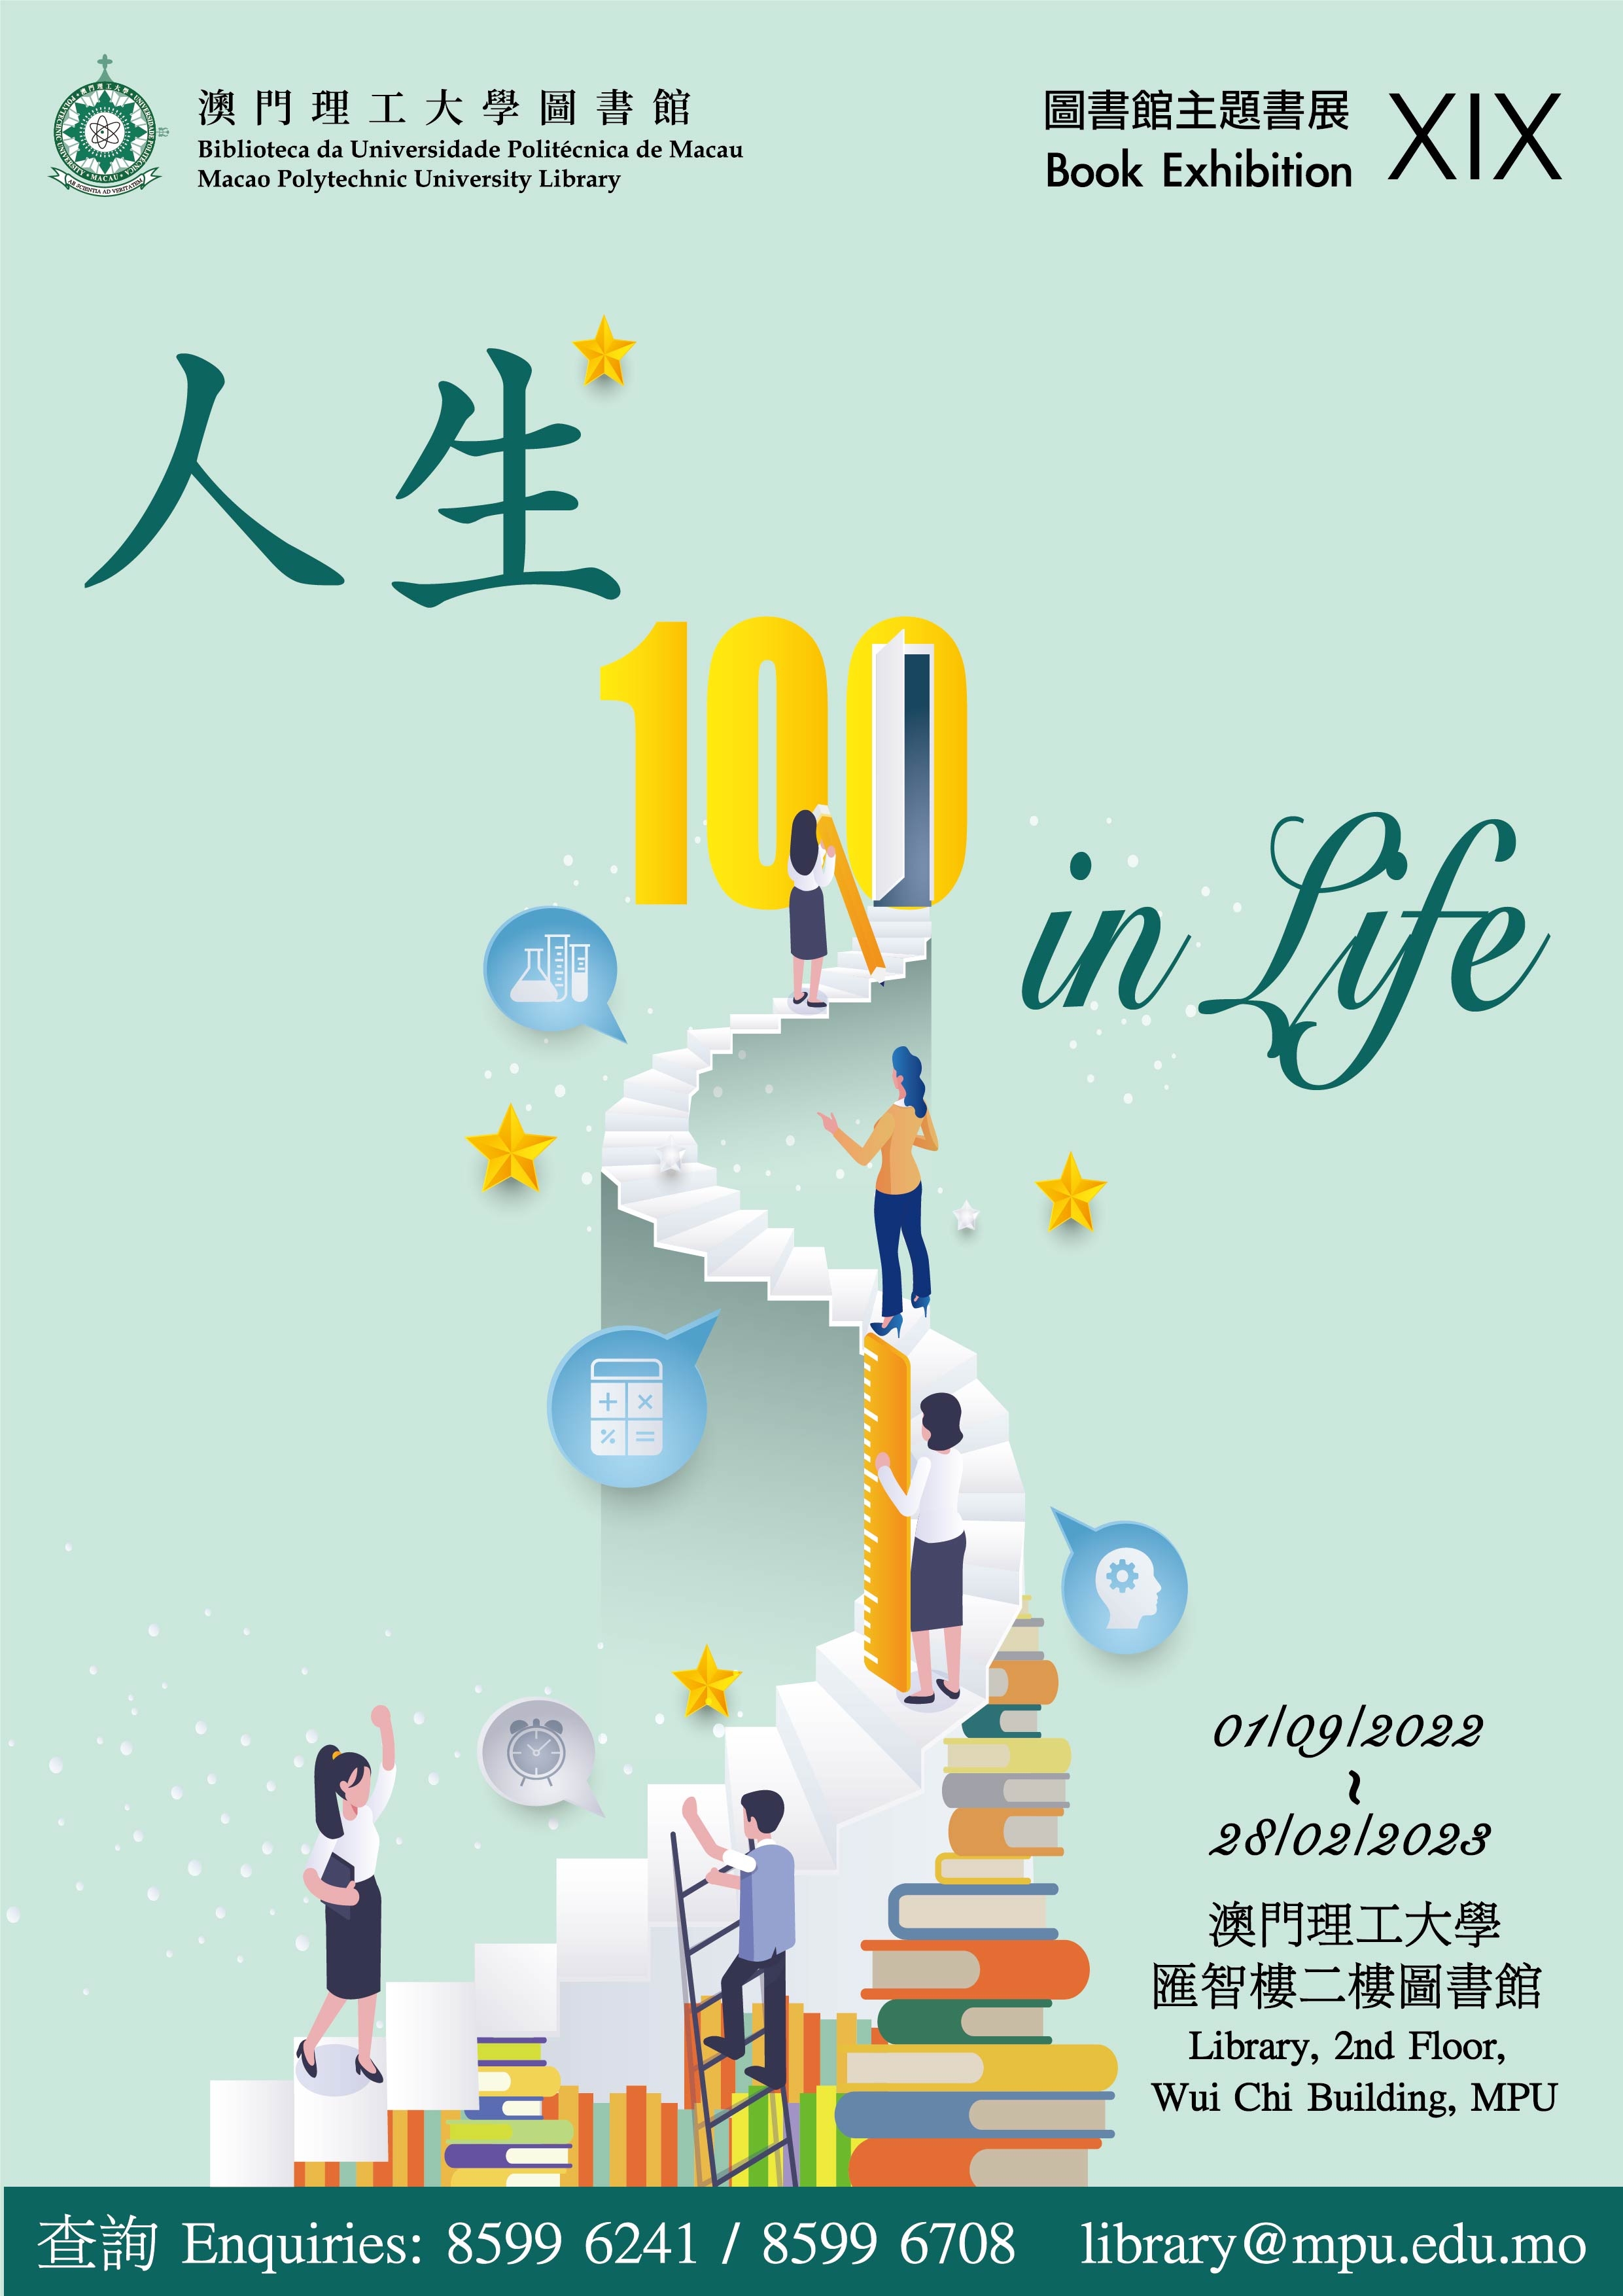 BOOK EXHIBITION 19 : 100 in Life